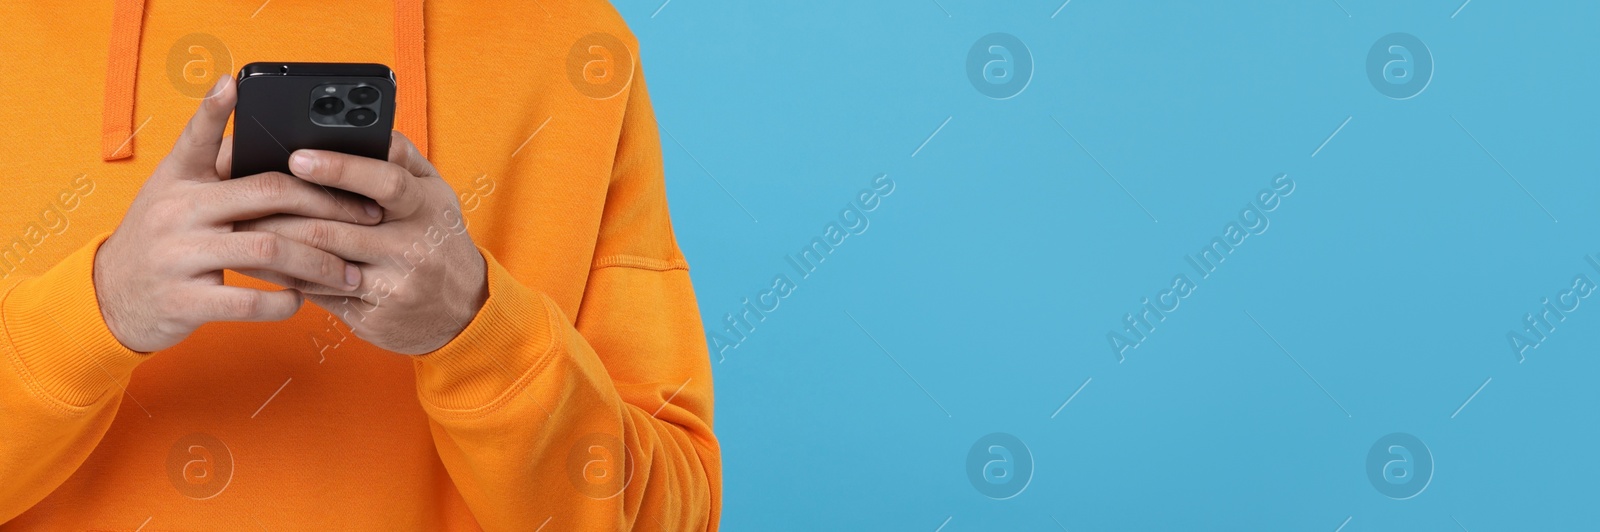 Image of Man typing message on mobile phone against light blue background, closeup. Banner design with space for text